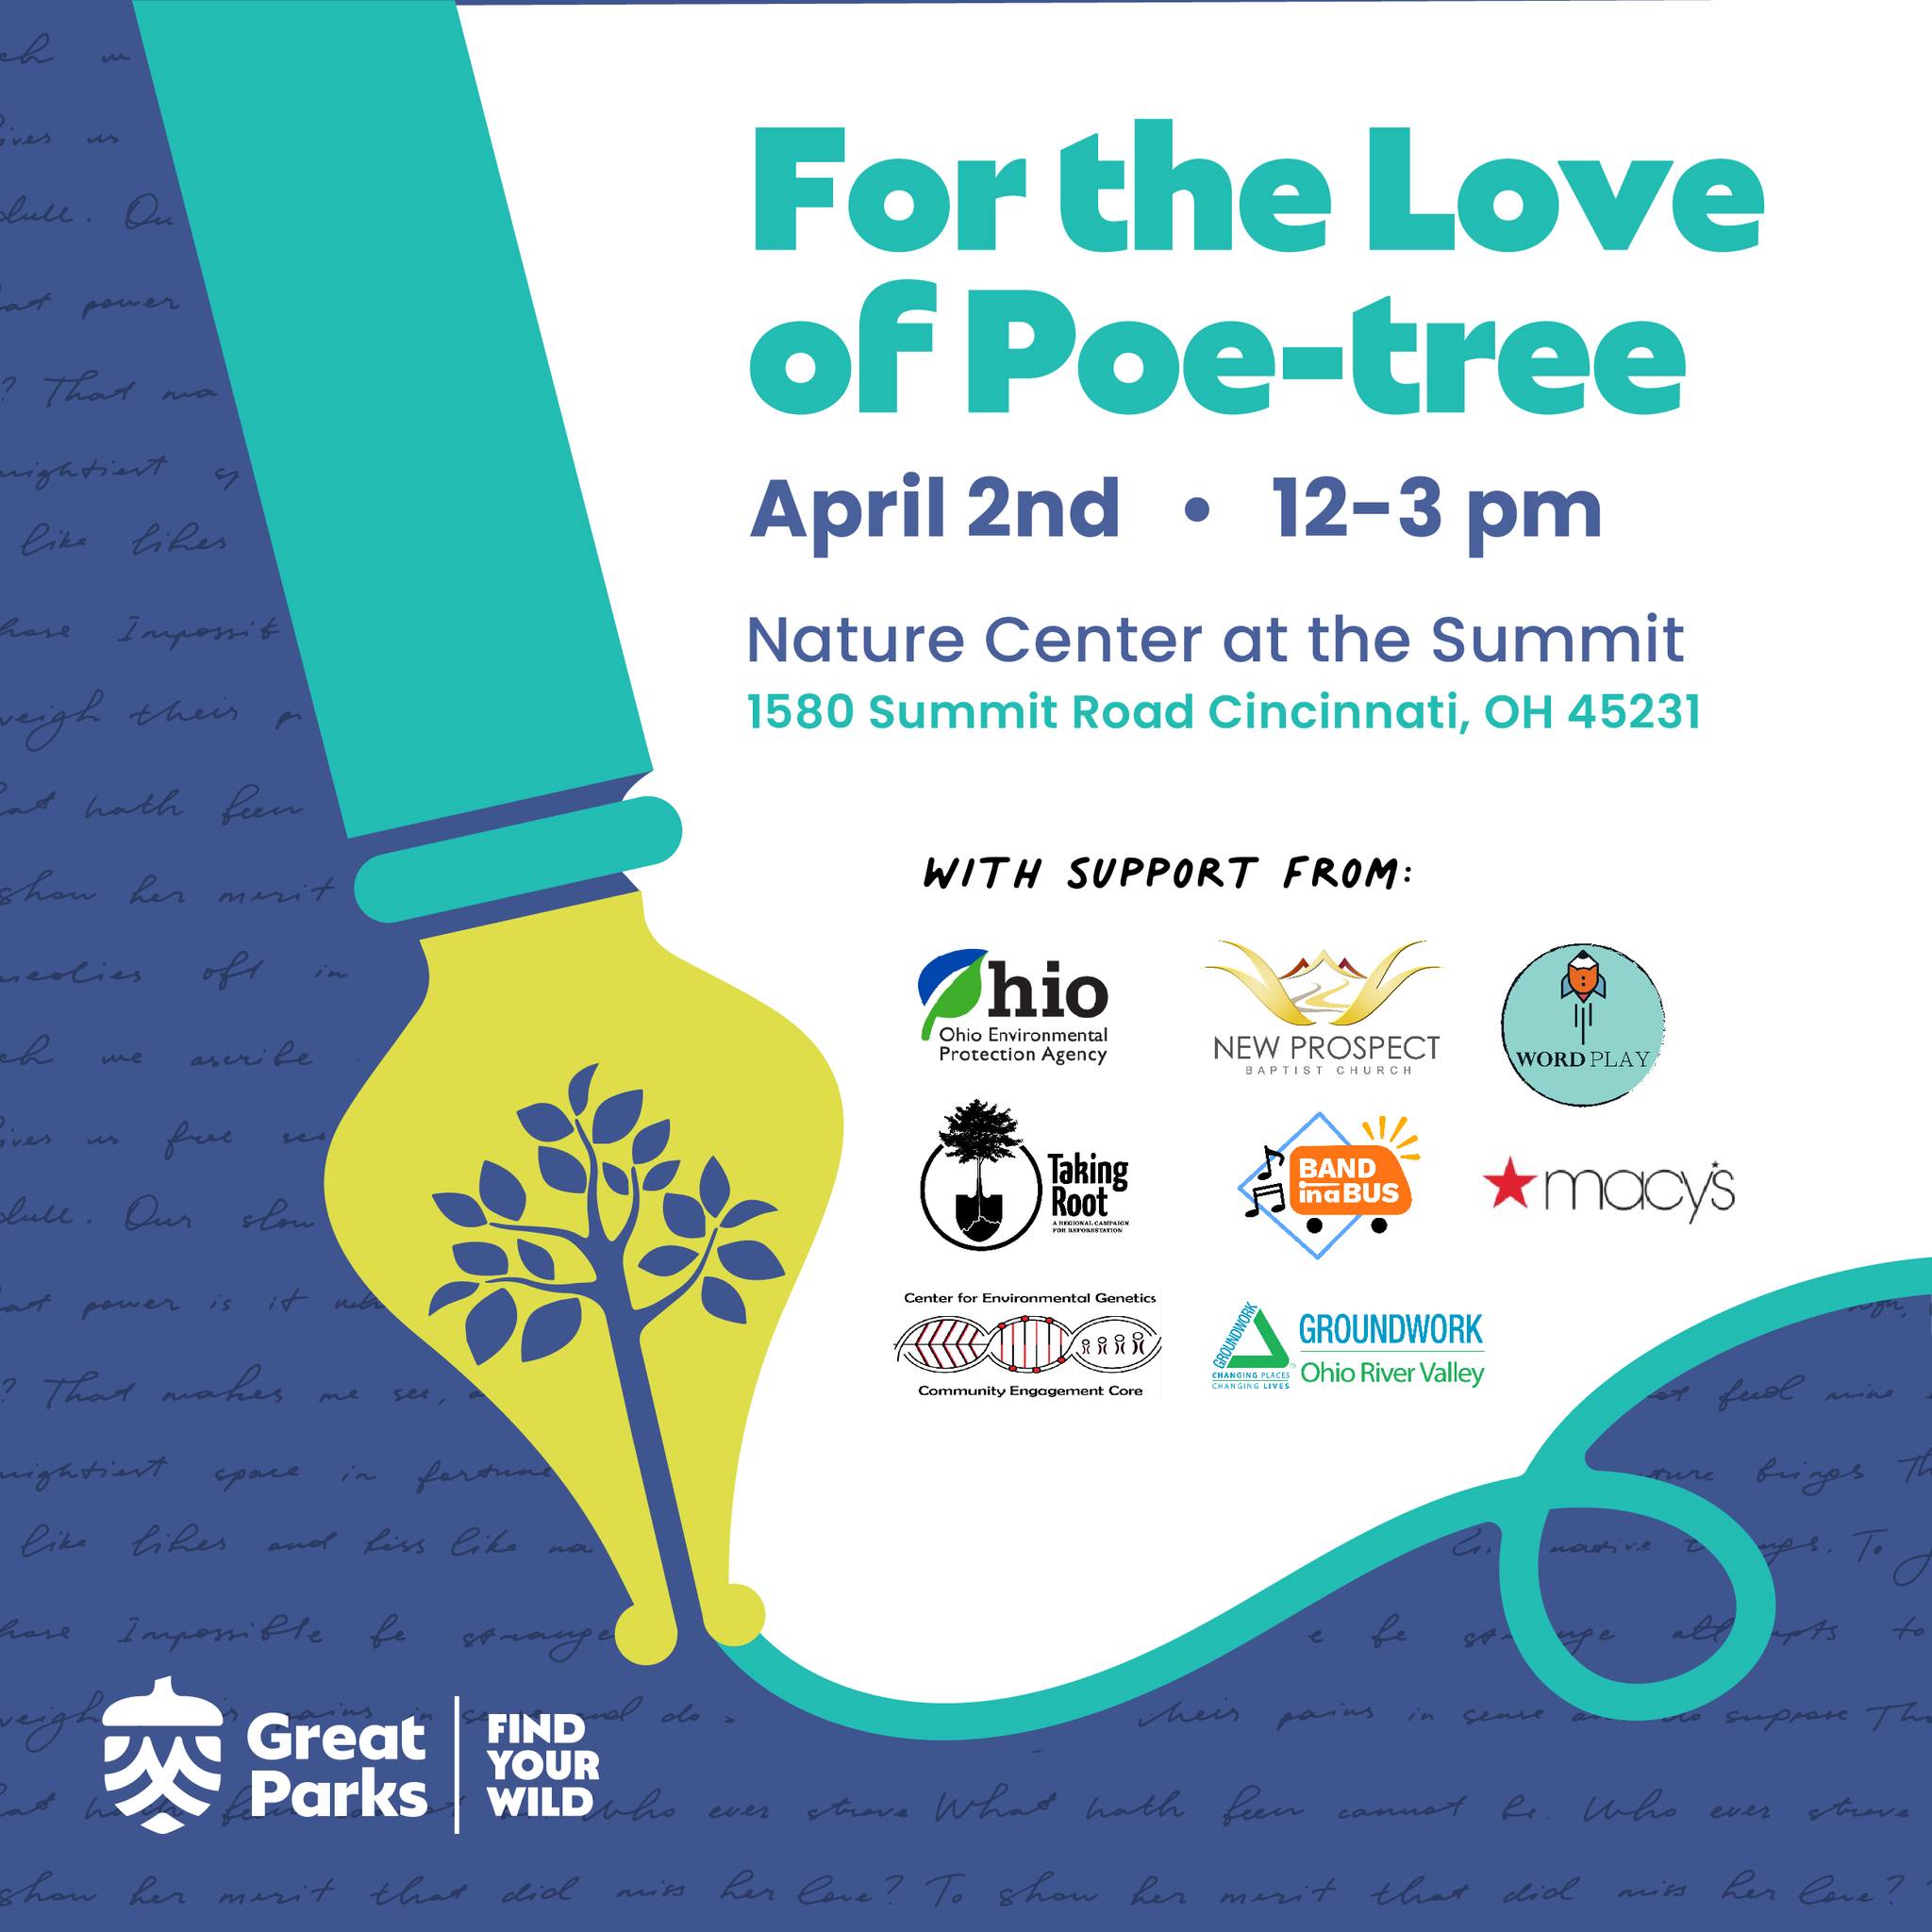 For the Love of Poe-Tree at the Nature Center at the Summit on Sunday April 2nd from 12 p.m. to 3 p.m.